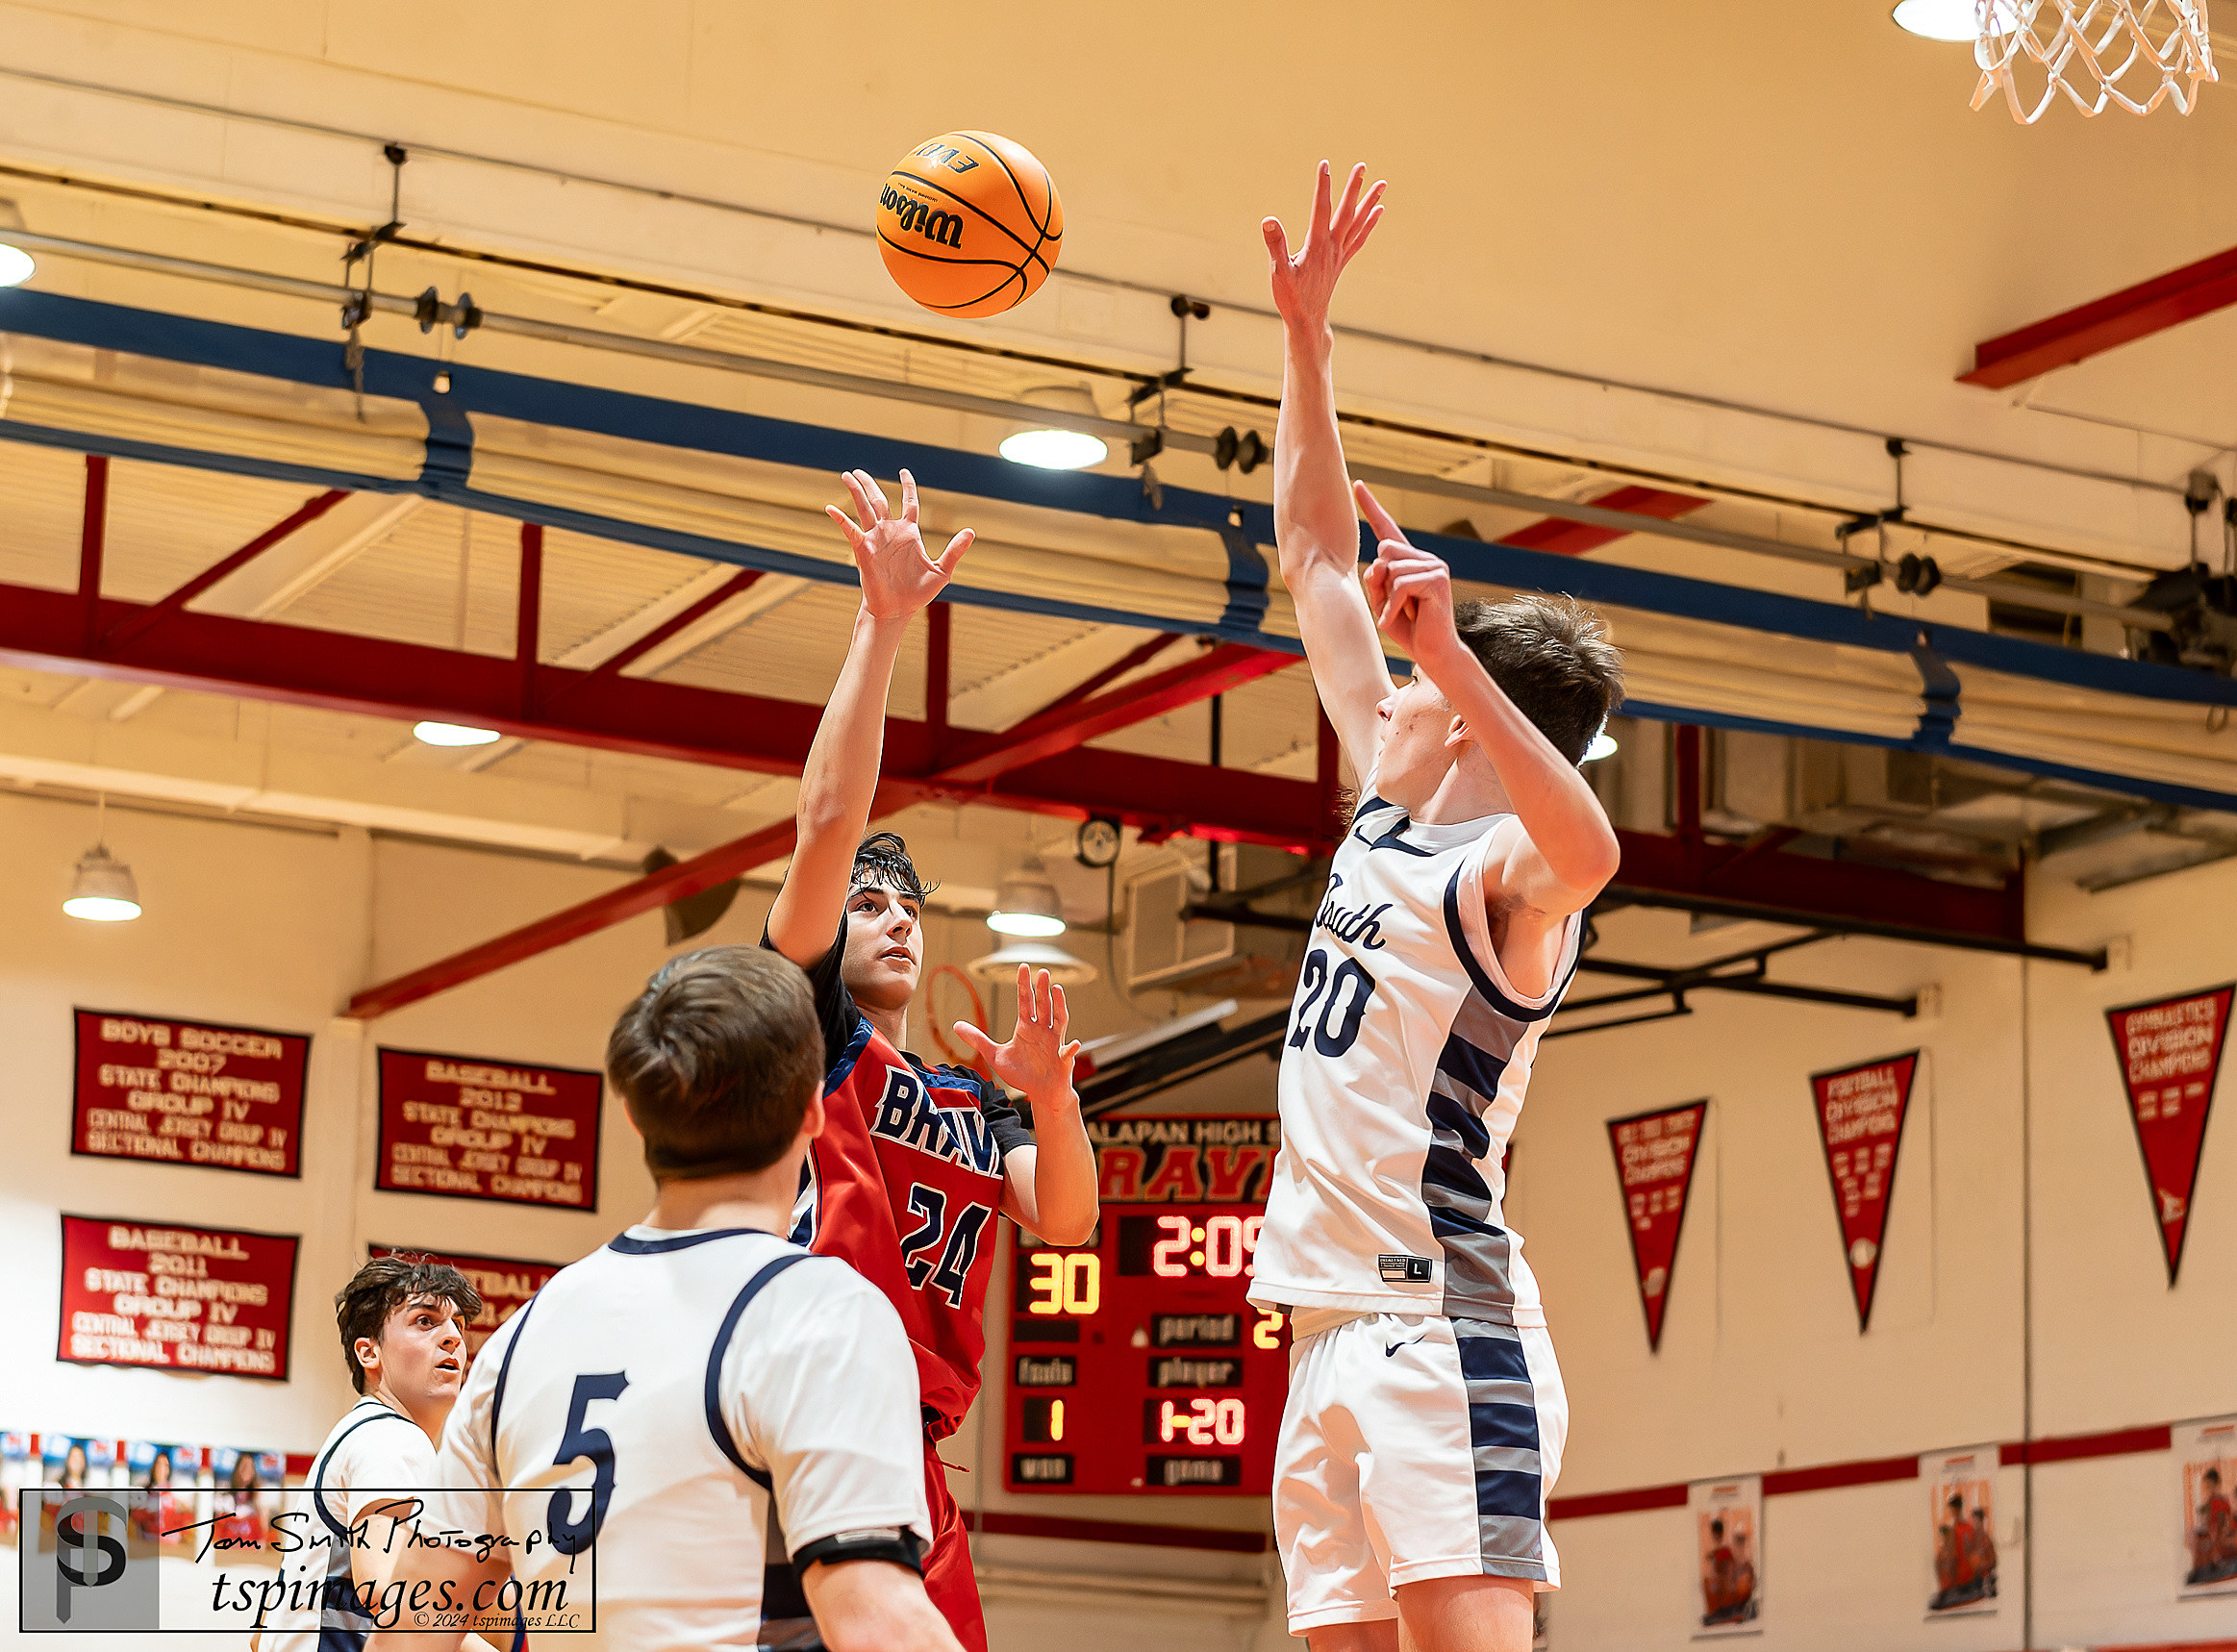 Manalapan senior Phil Pearlman shoots over Middletown South senior Will Nugent. (Photo: Tom Smith | tspsportsimages.com)